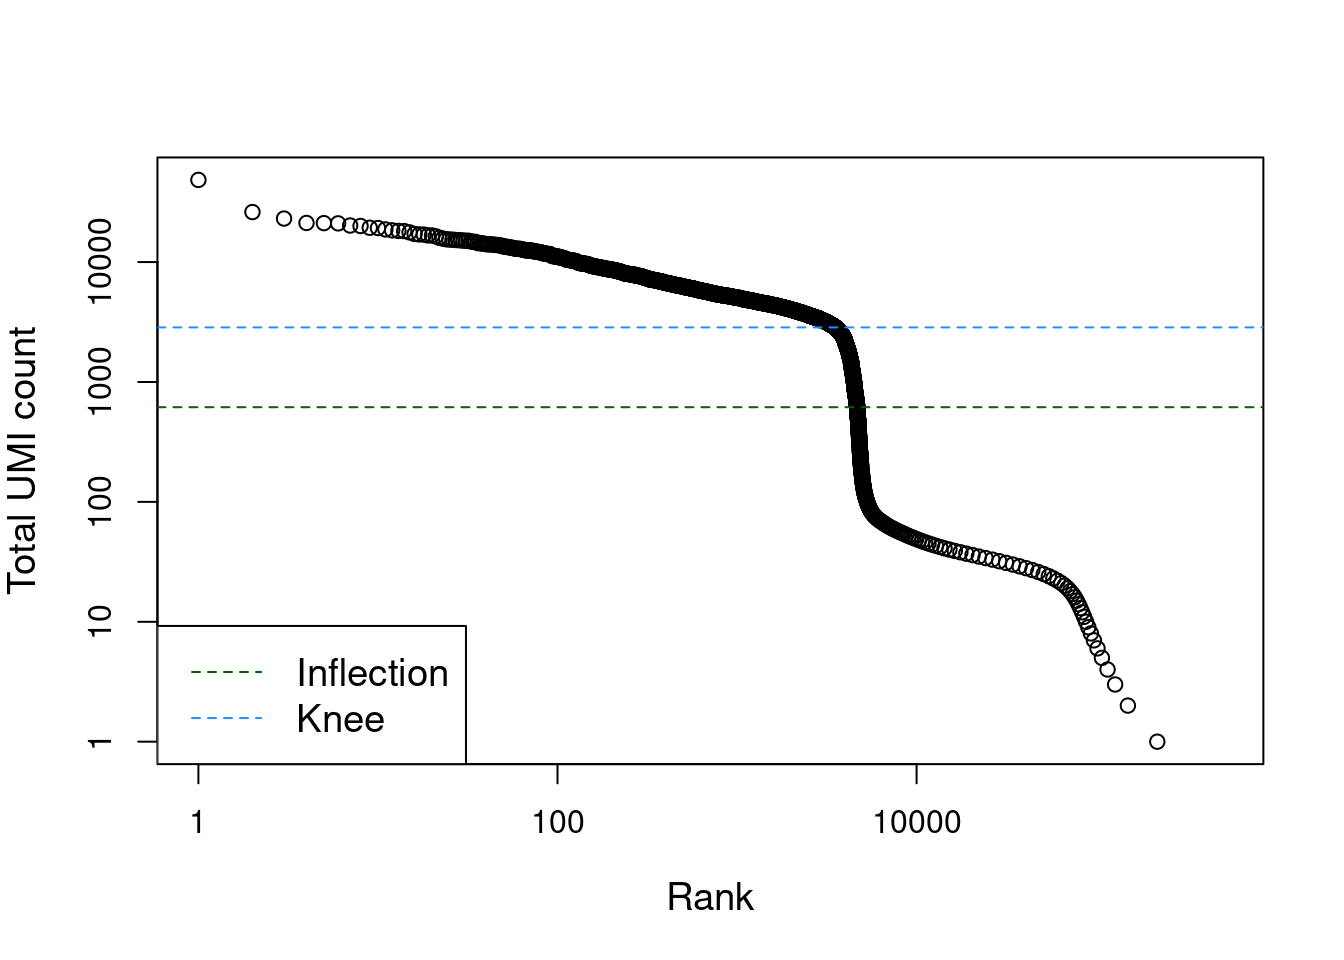 Total UMI count for each barcode in the PBMC dataset, plotted against its rank (in decreasing order of total counts). The inferred locations of the inflection and knee points are also shown.